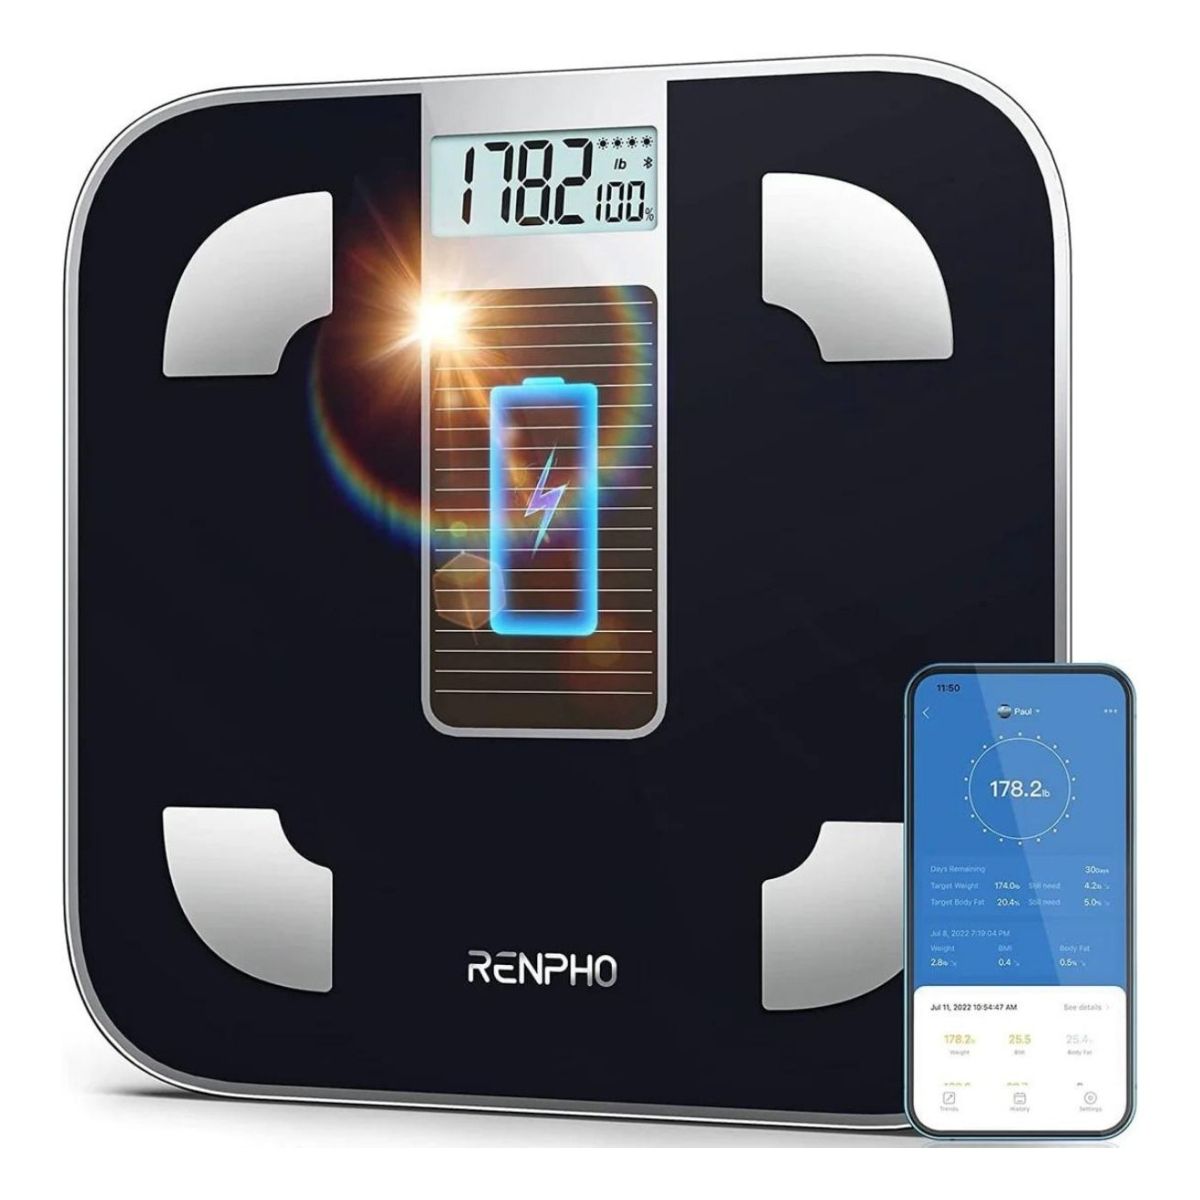 RENPHO Body Fat Scale: Normal Mode or Athlete Mode, Which Is Right